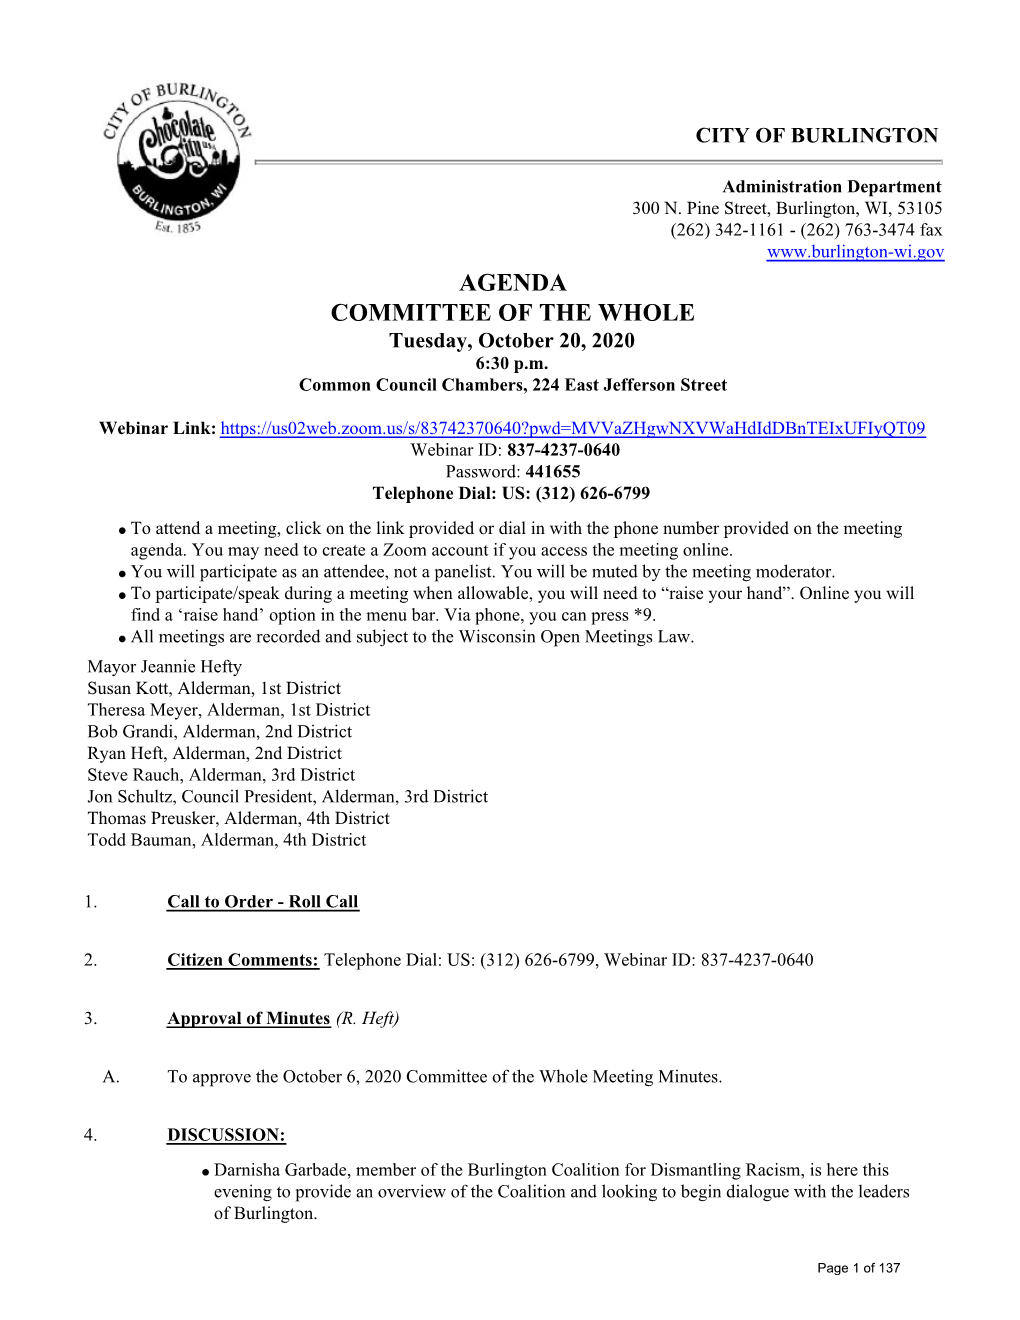 AGENDA COMMITTEE of the WHOLE Tuesday, October 20, 2020 6:30 P.M